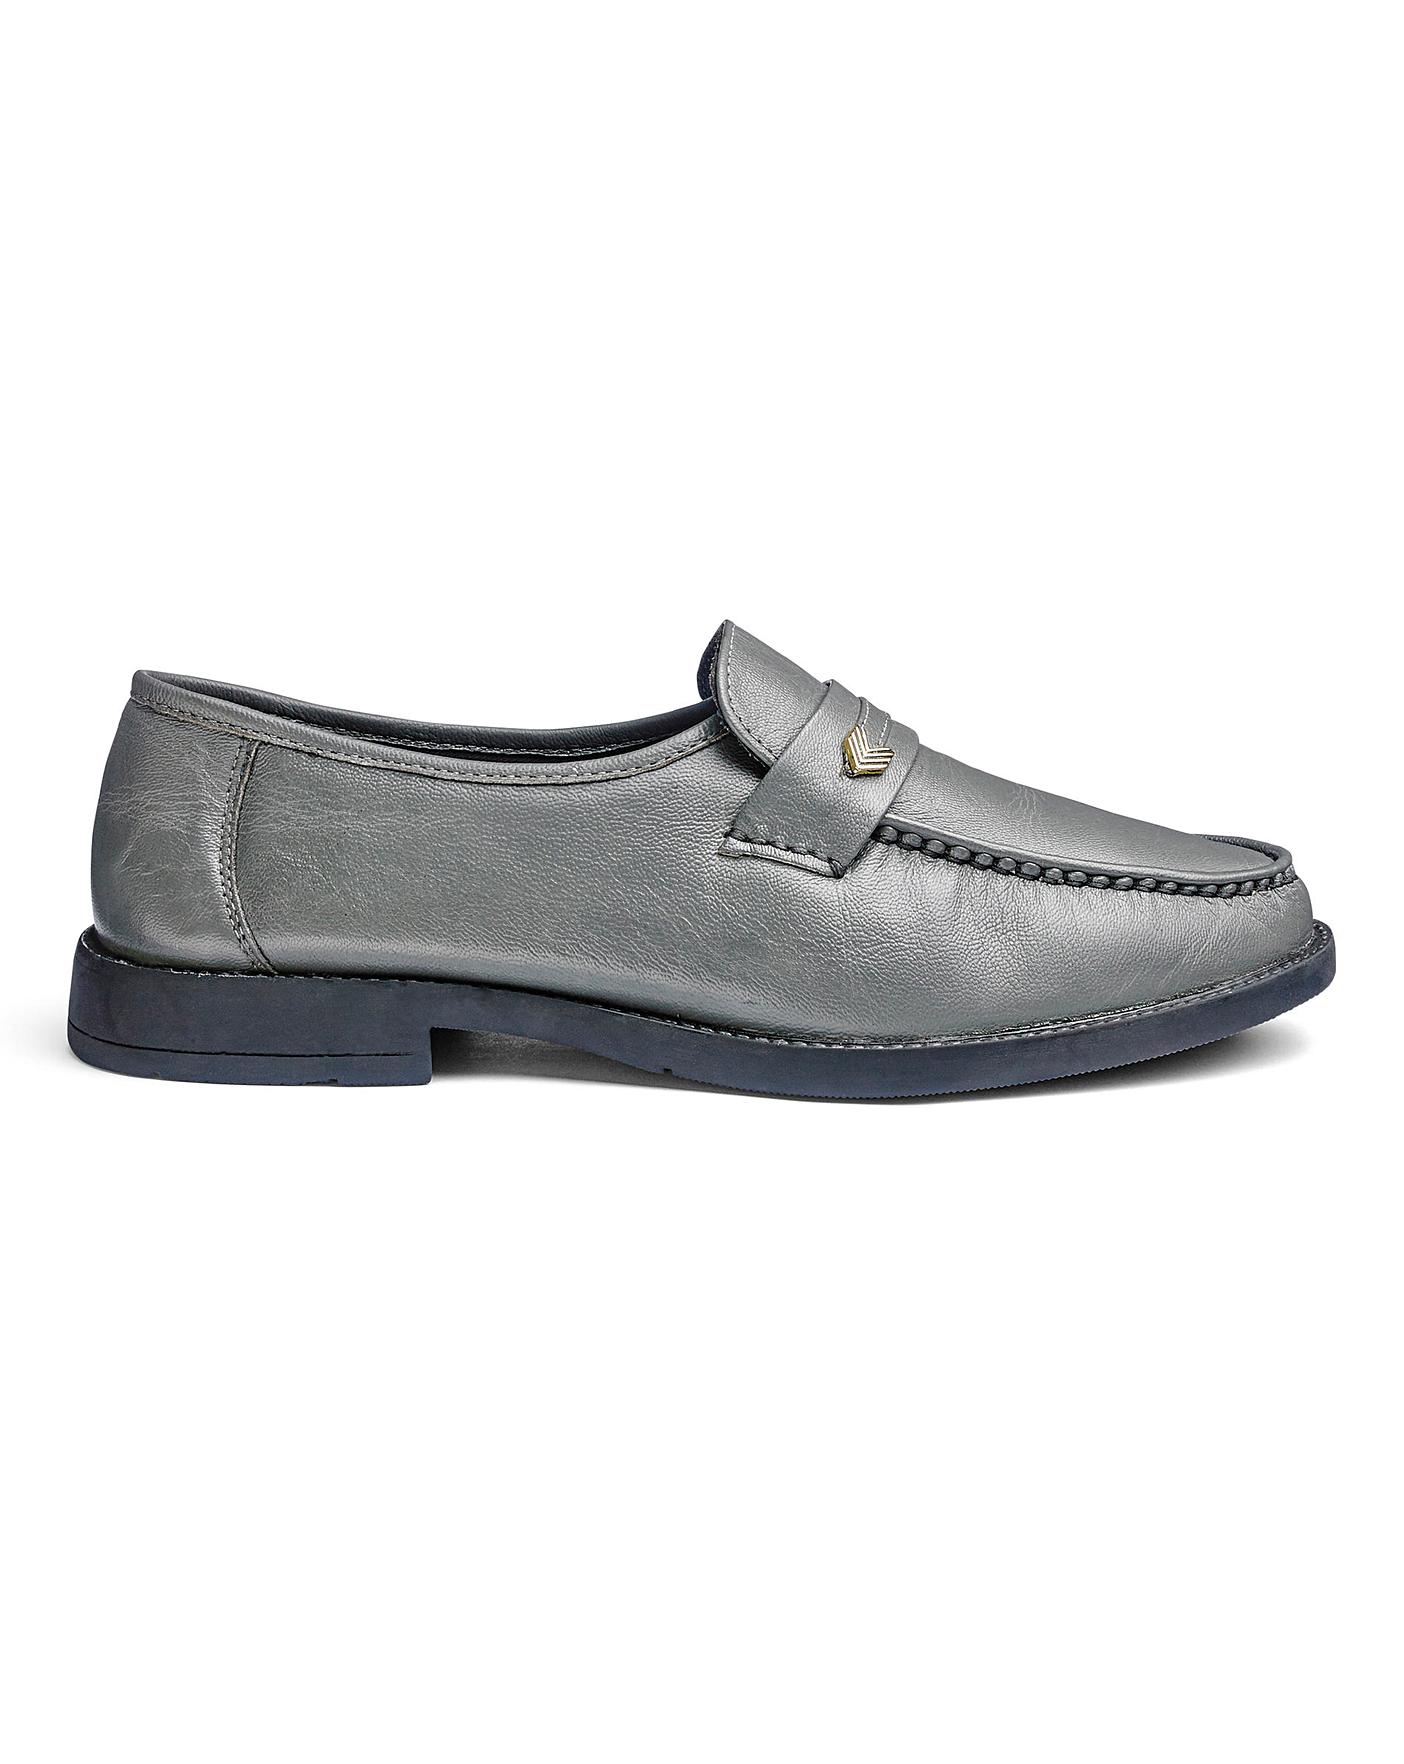 Leather Slip On Shoes Standard Fit